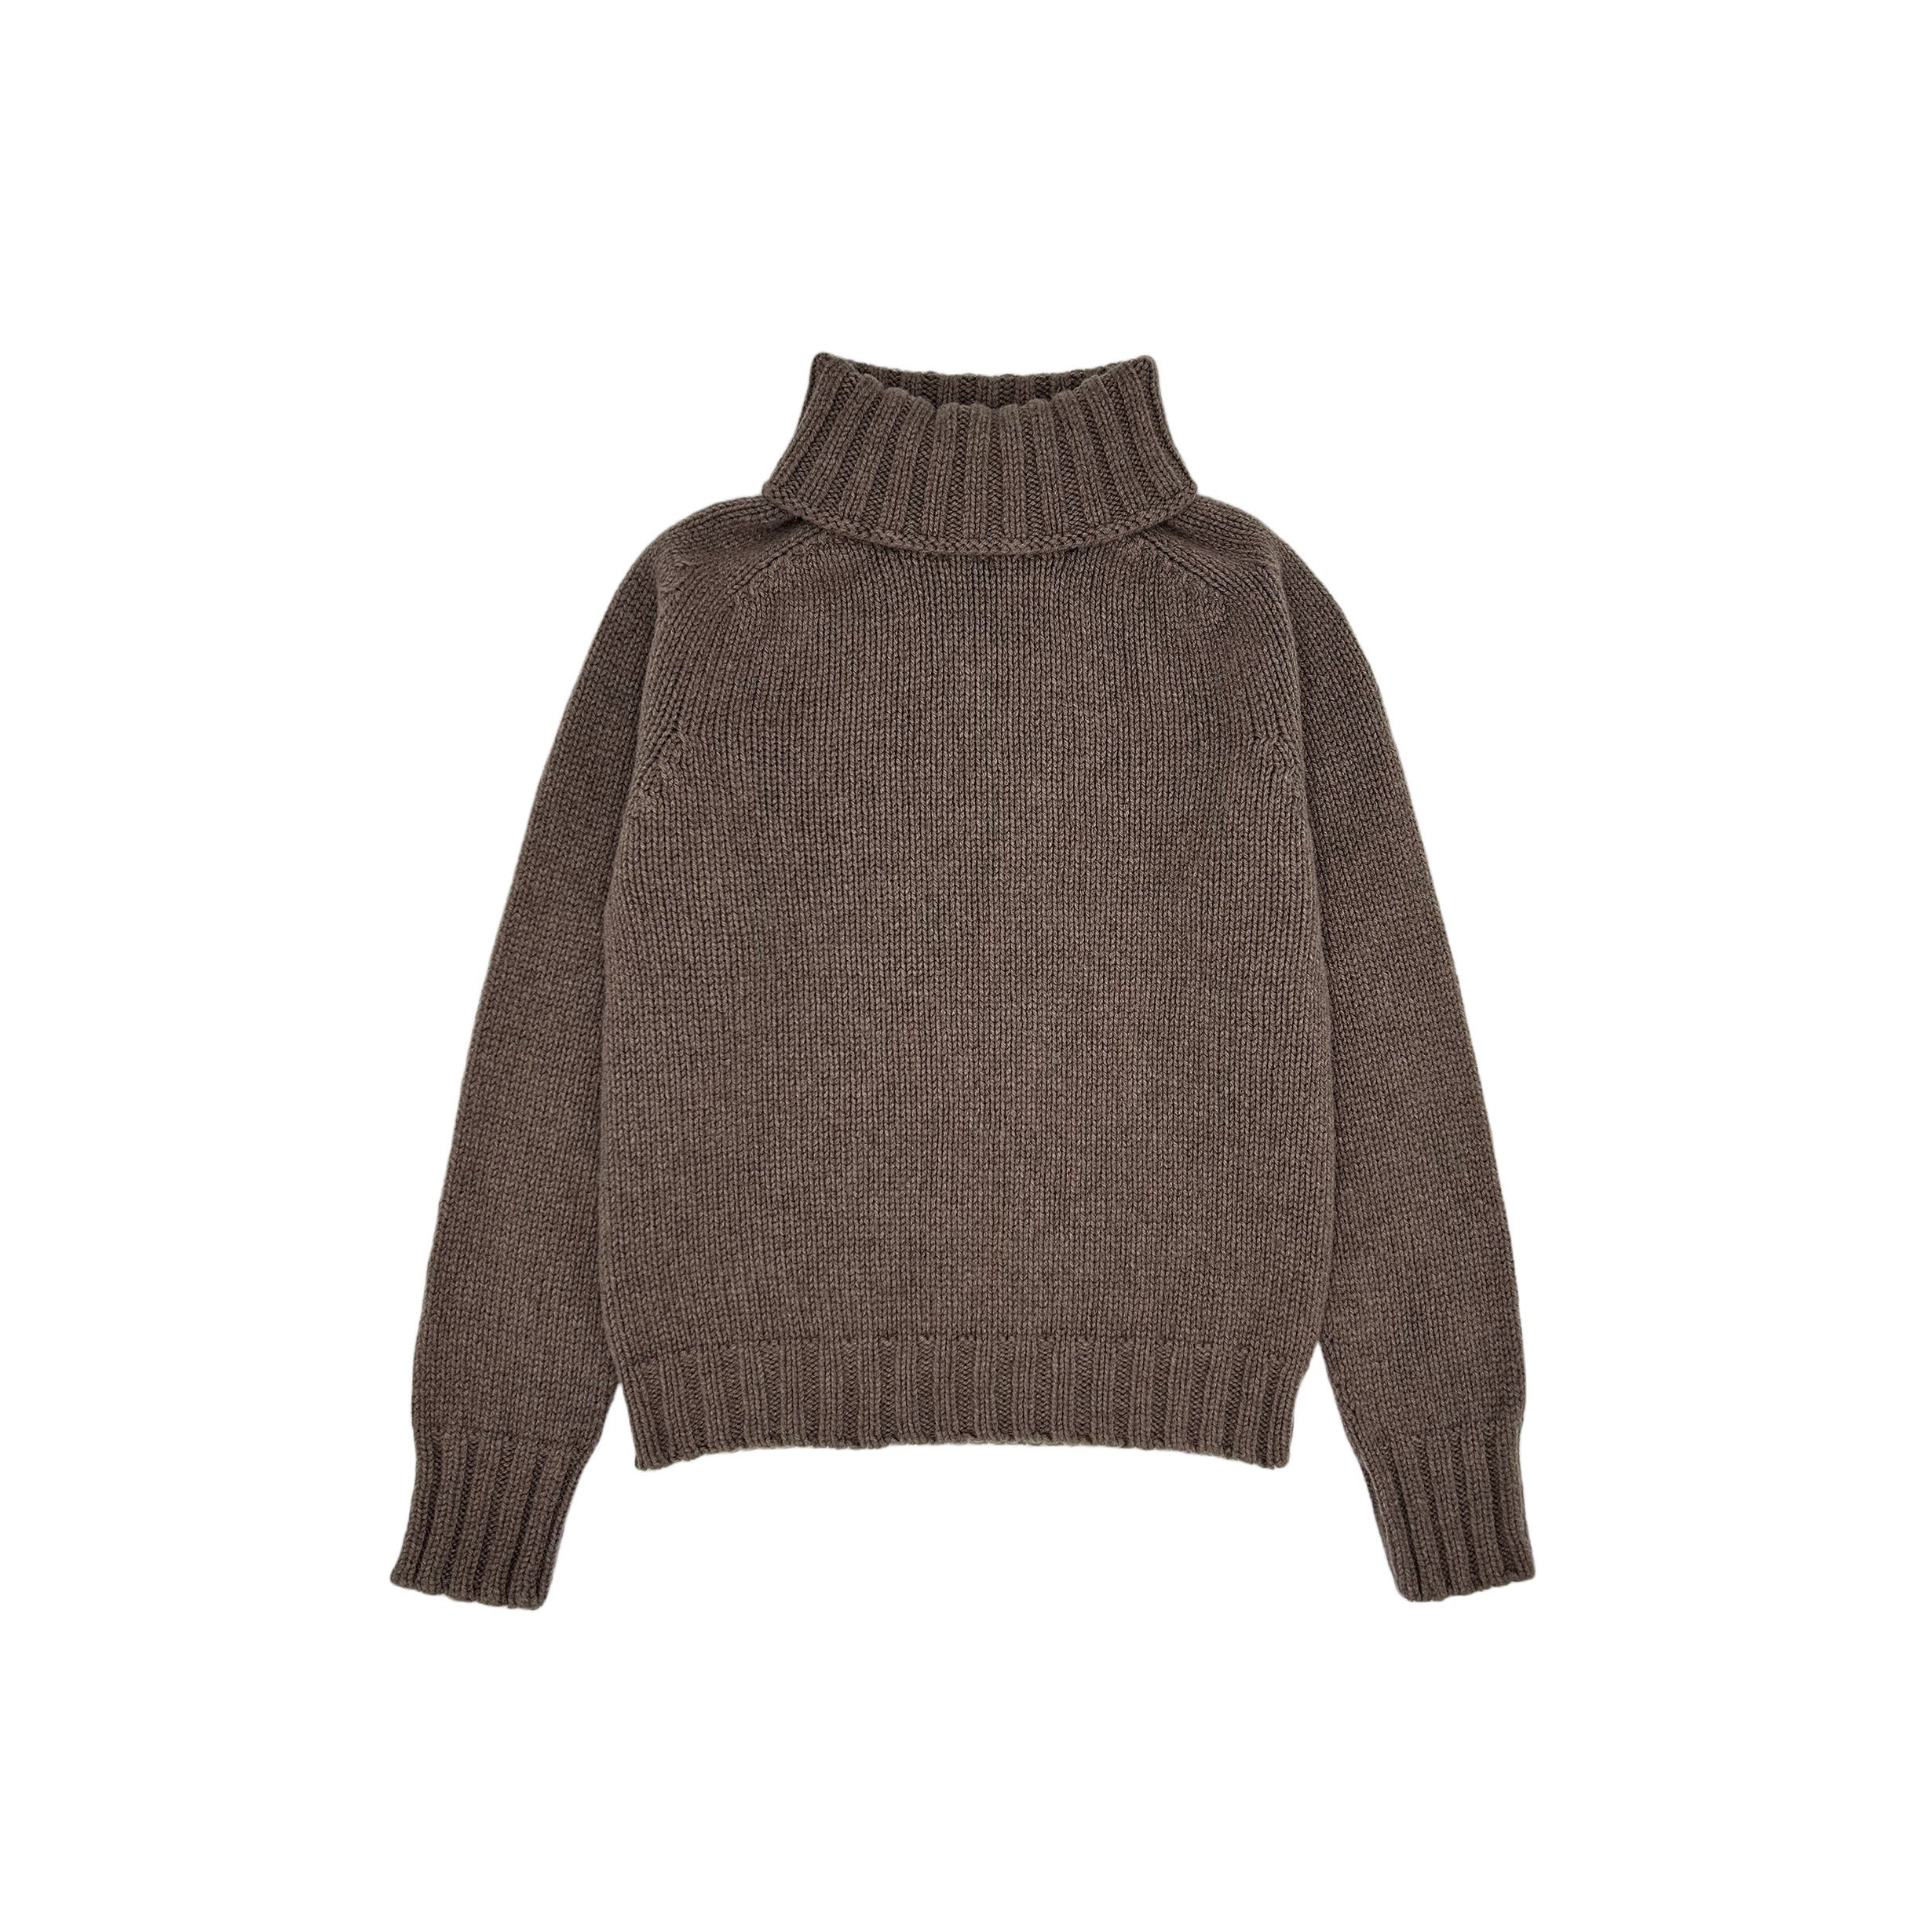 An image of Womens 'Big Softy' Geelong Polo Neck Jumper - 6 Colours - XL/Wildebeest Brown